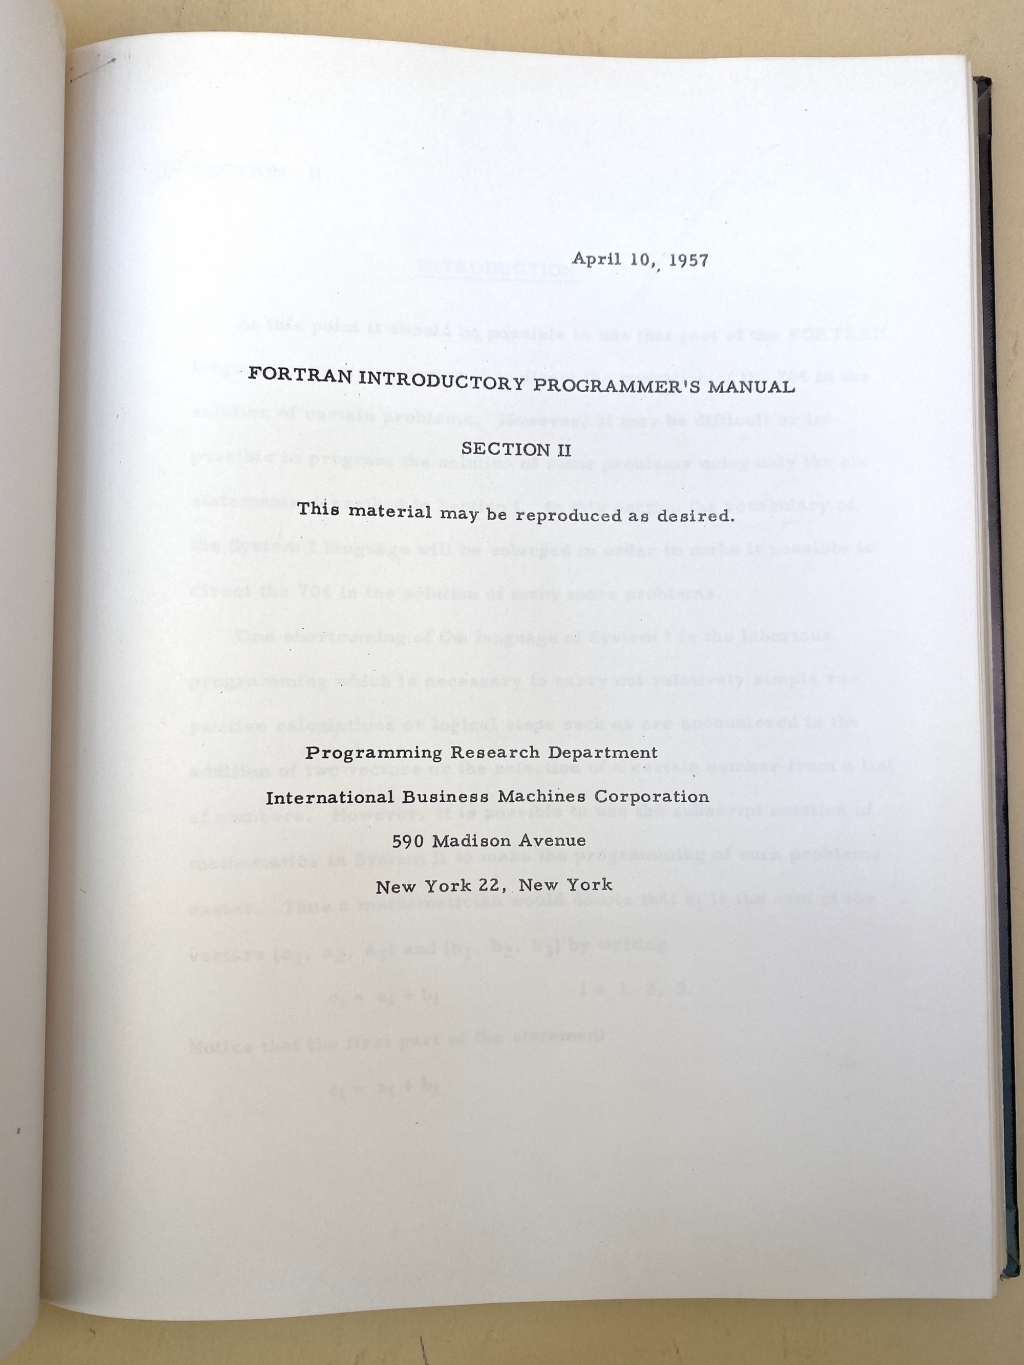 Fortran preliminary manual section II title page